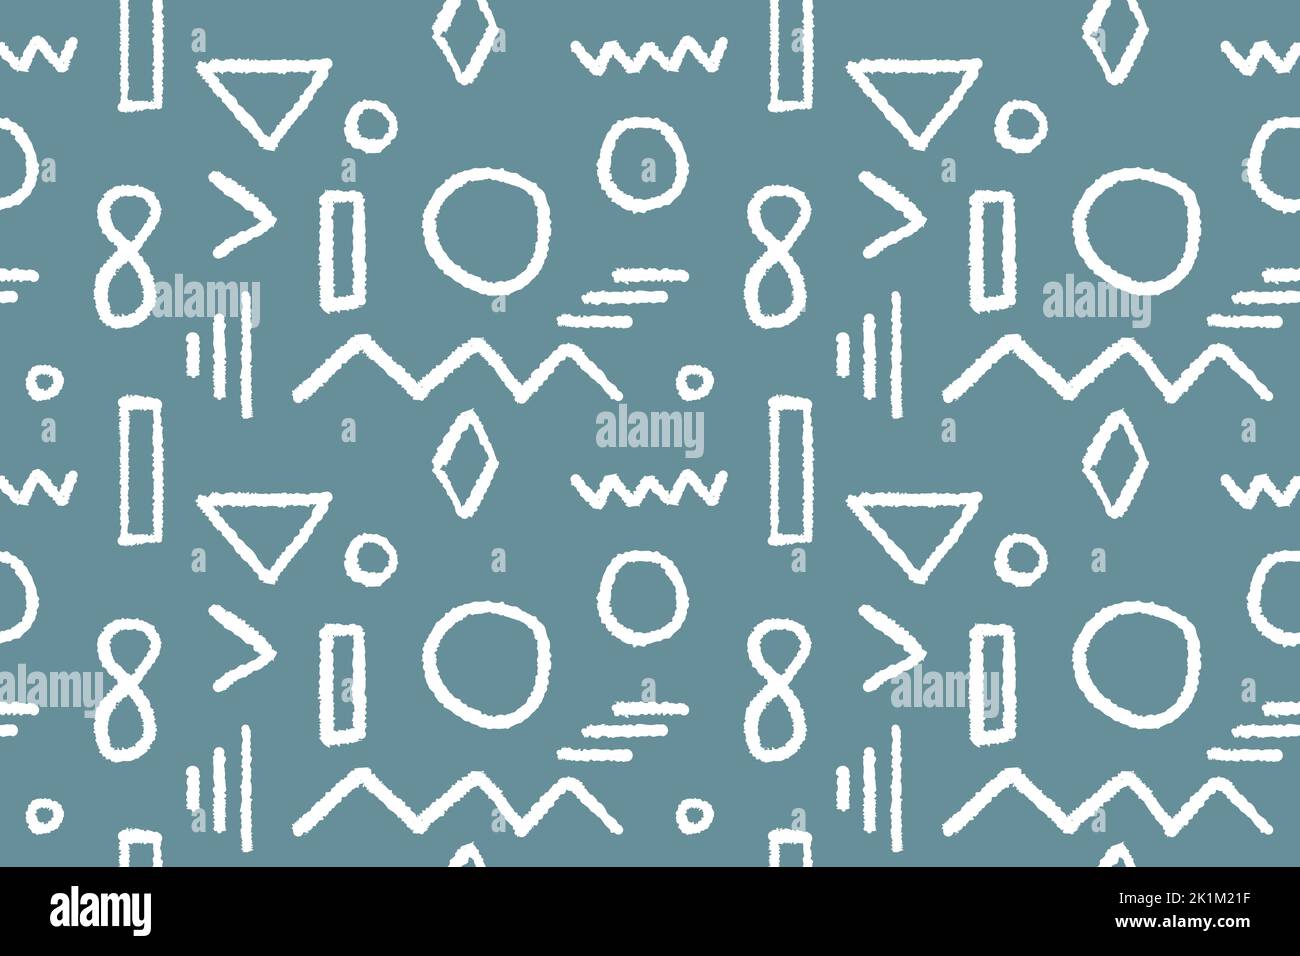 Seamless pattern. Abstract repeatable doodle background for fashion prints, textiles, wallpapers and wrapping paper. Stock Vector